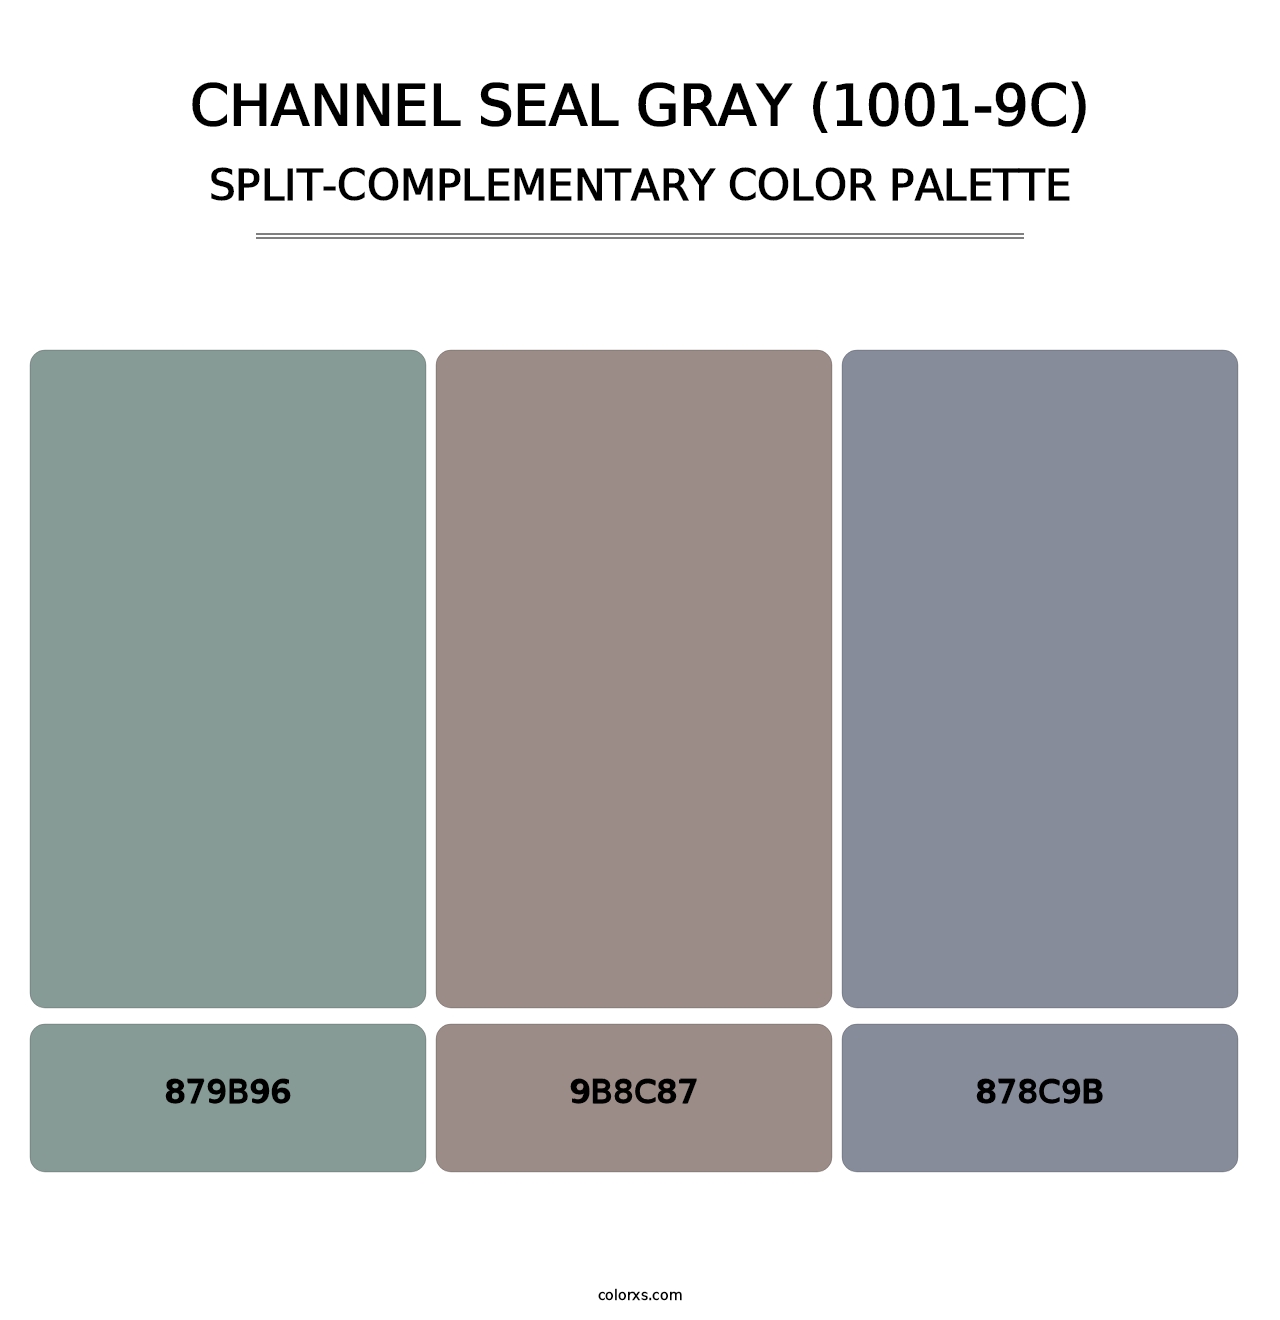 Channel Seal Gray (1001-9C) - Split-Complementary Color Palette